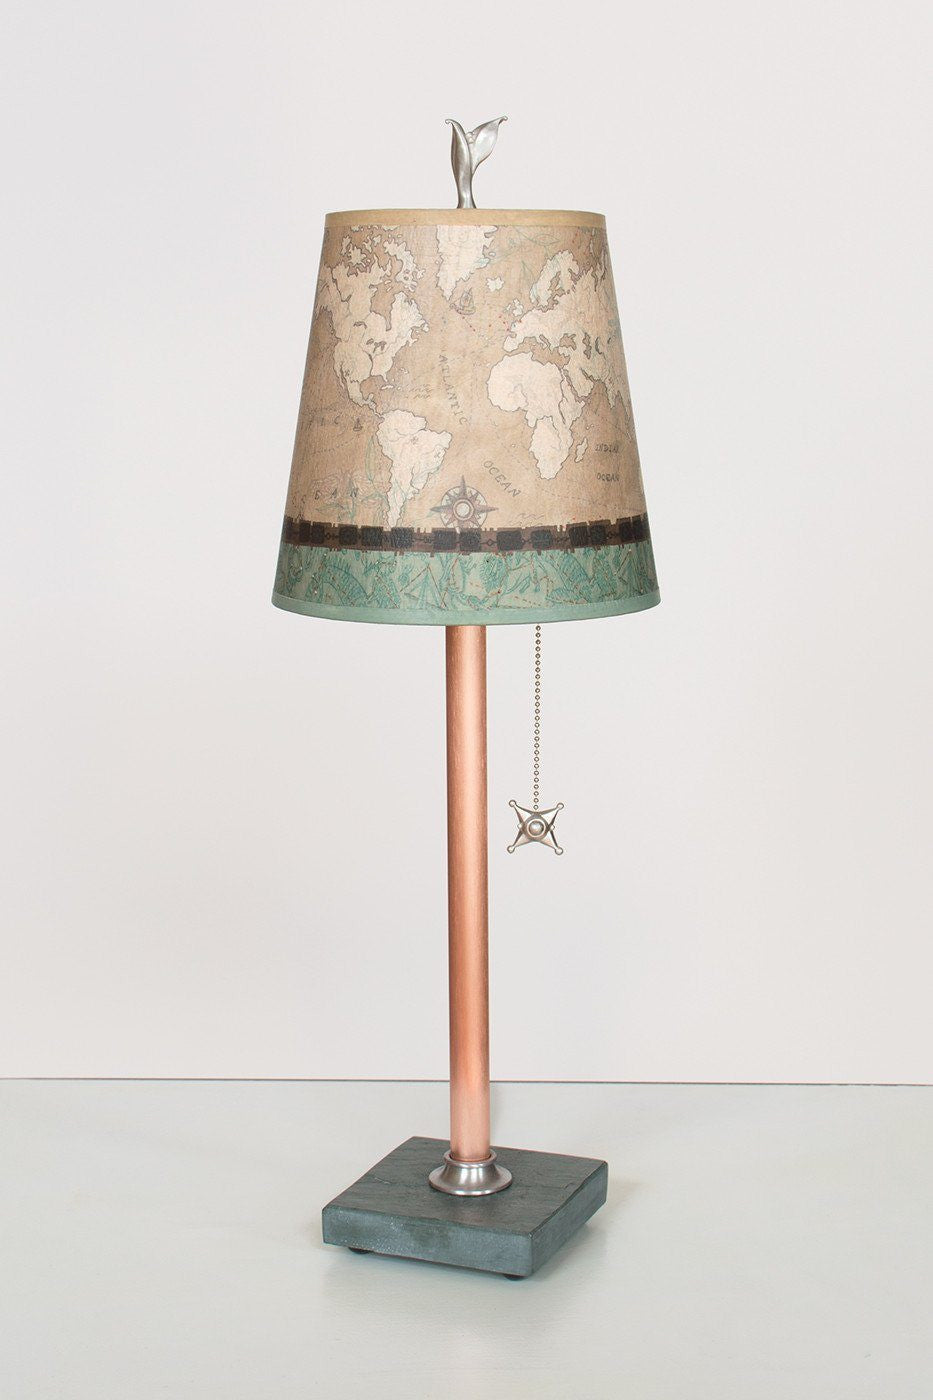 Copper Table Lamp on Vermont Slate Base with Small Drum Shade in Sand Map Lit